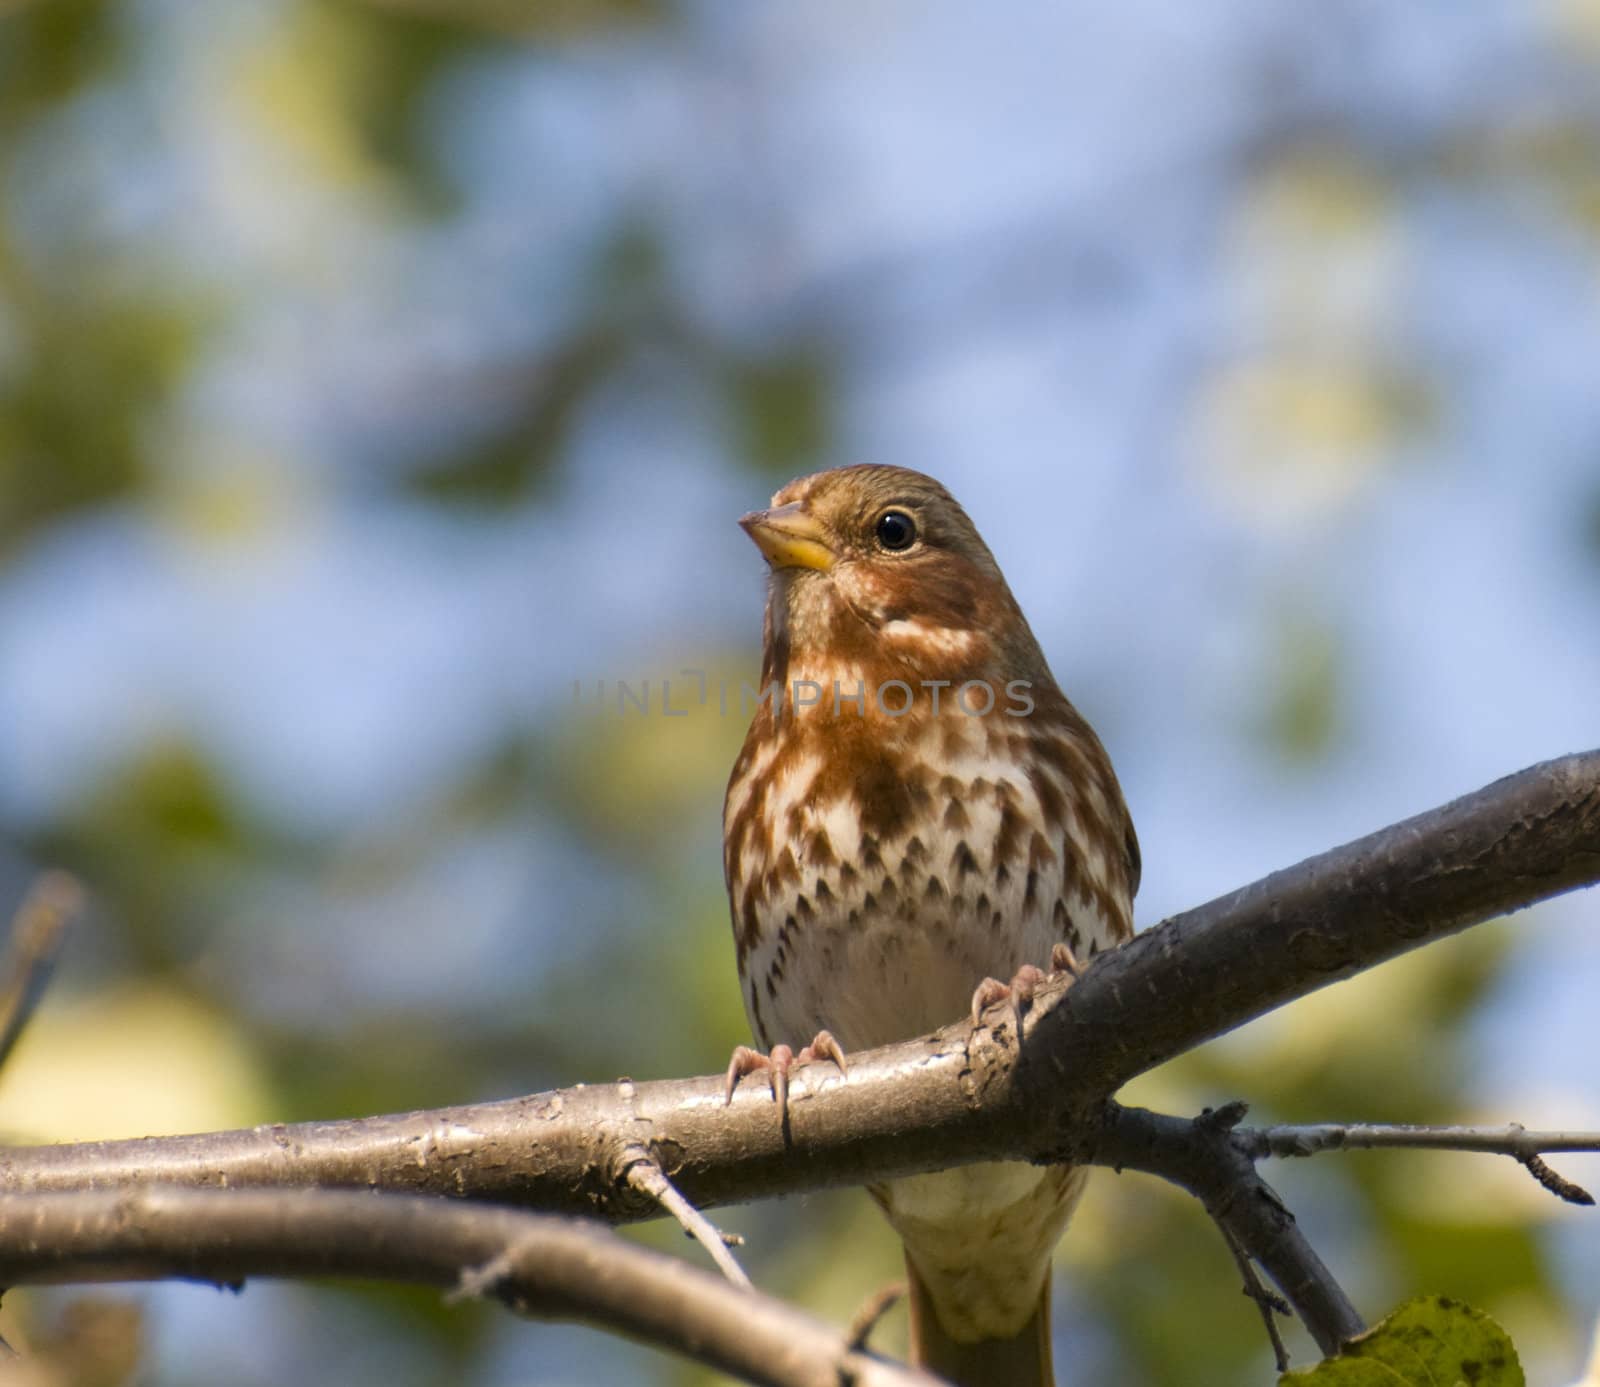 Closeup of a Song Sparrow on a tree branch